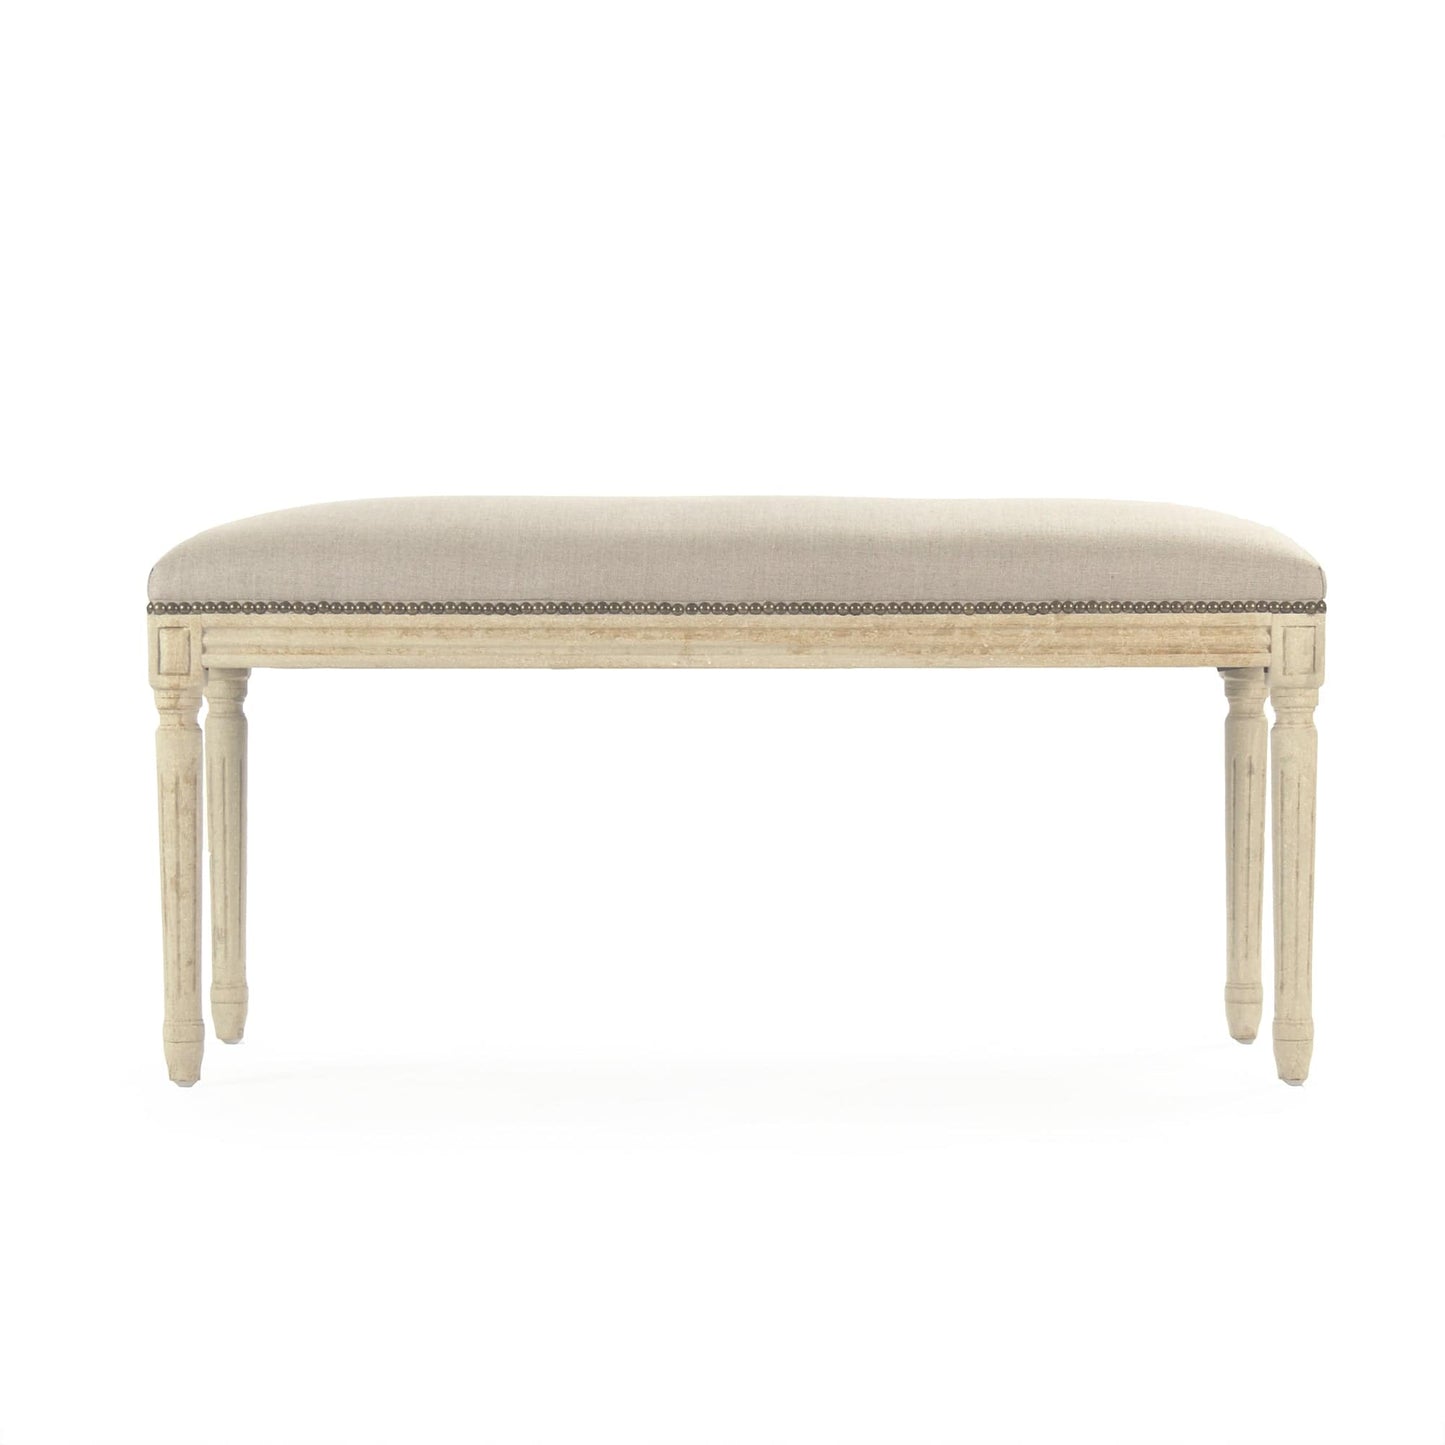 Zentique Lille Bench - Distressed Ivory Oak